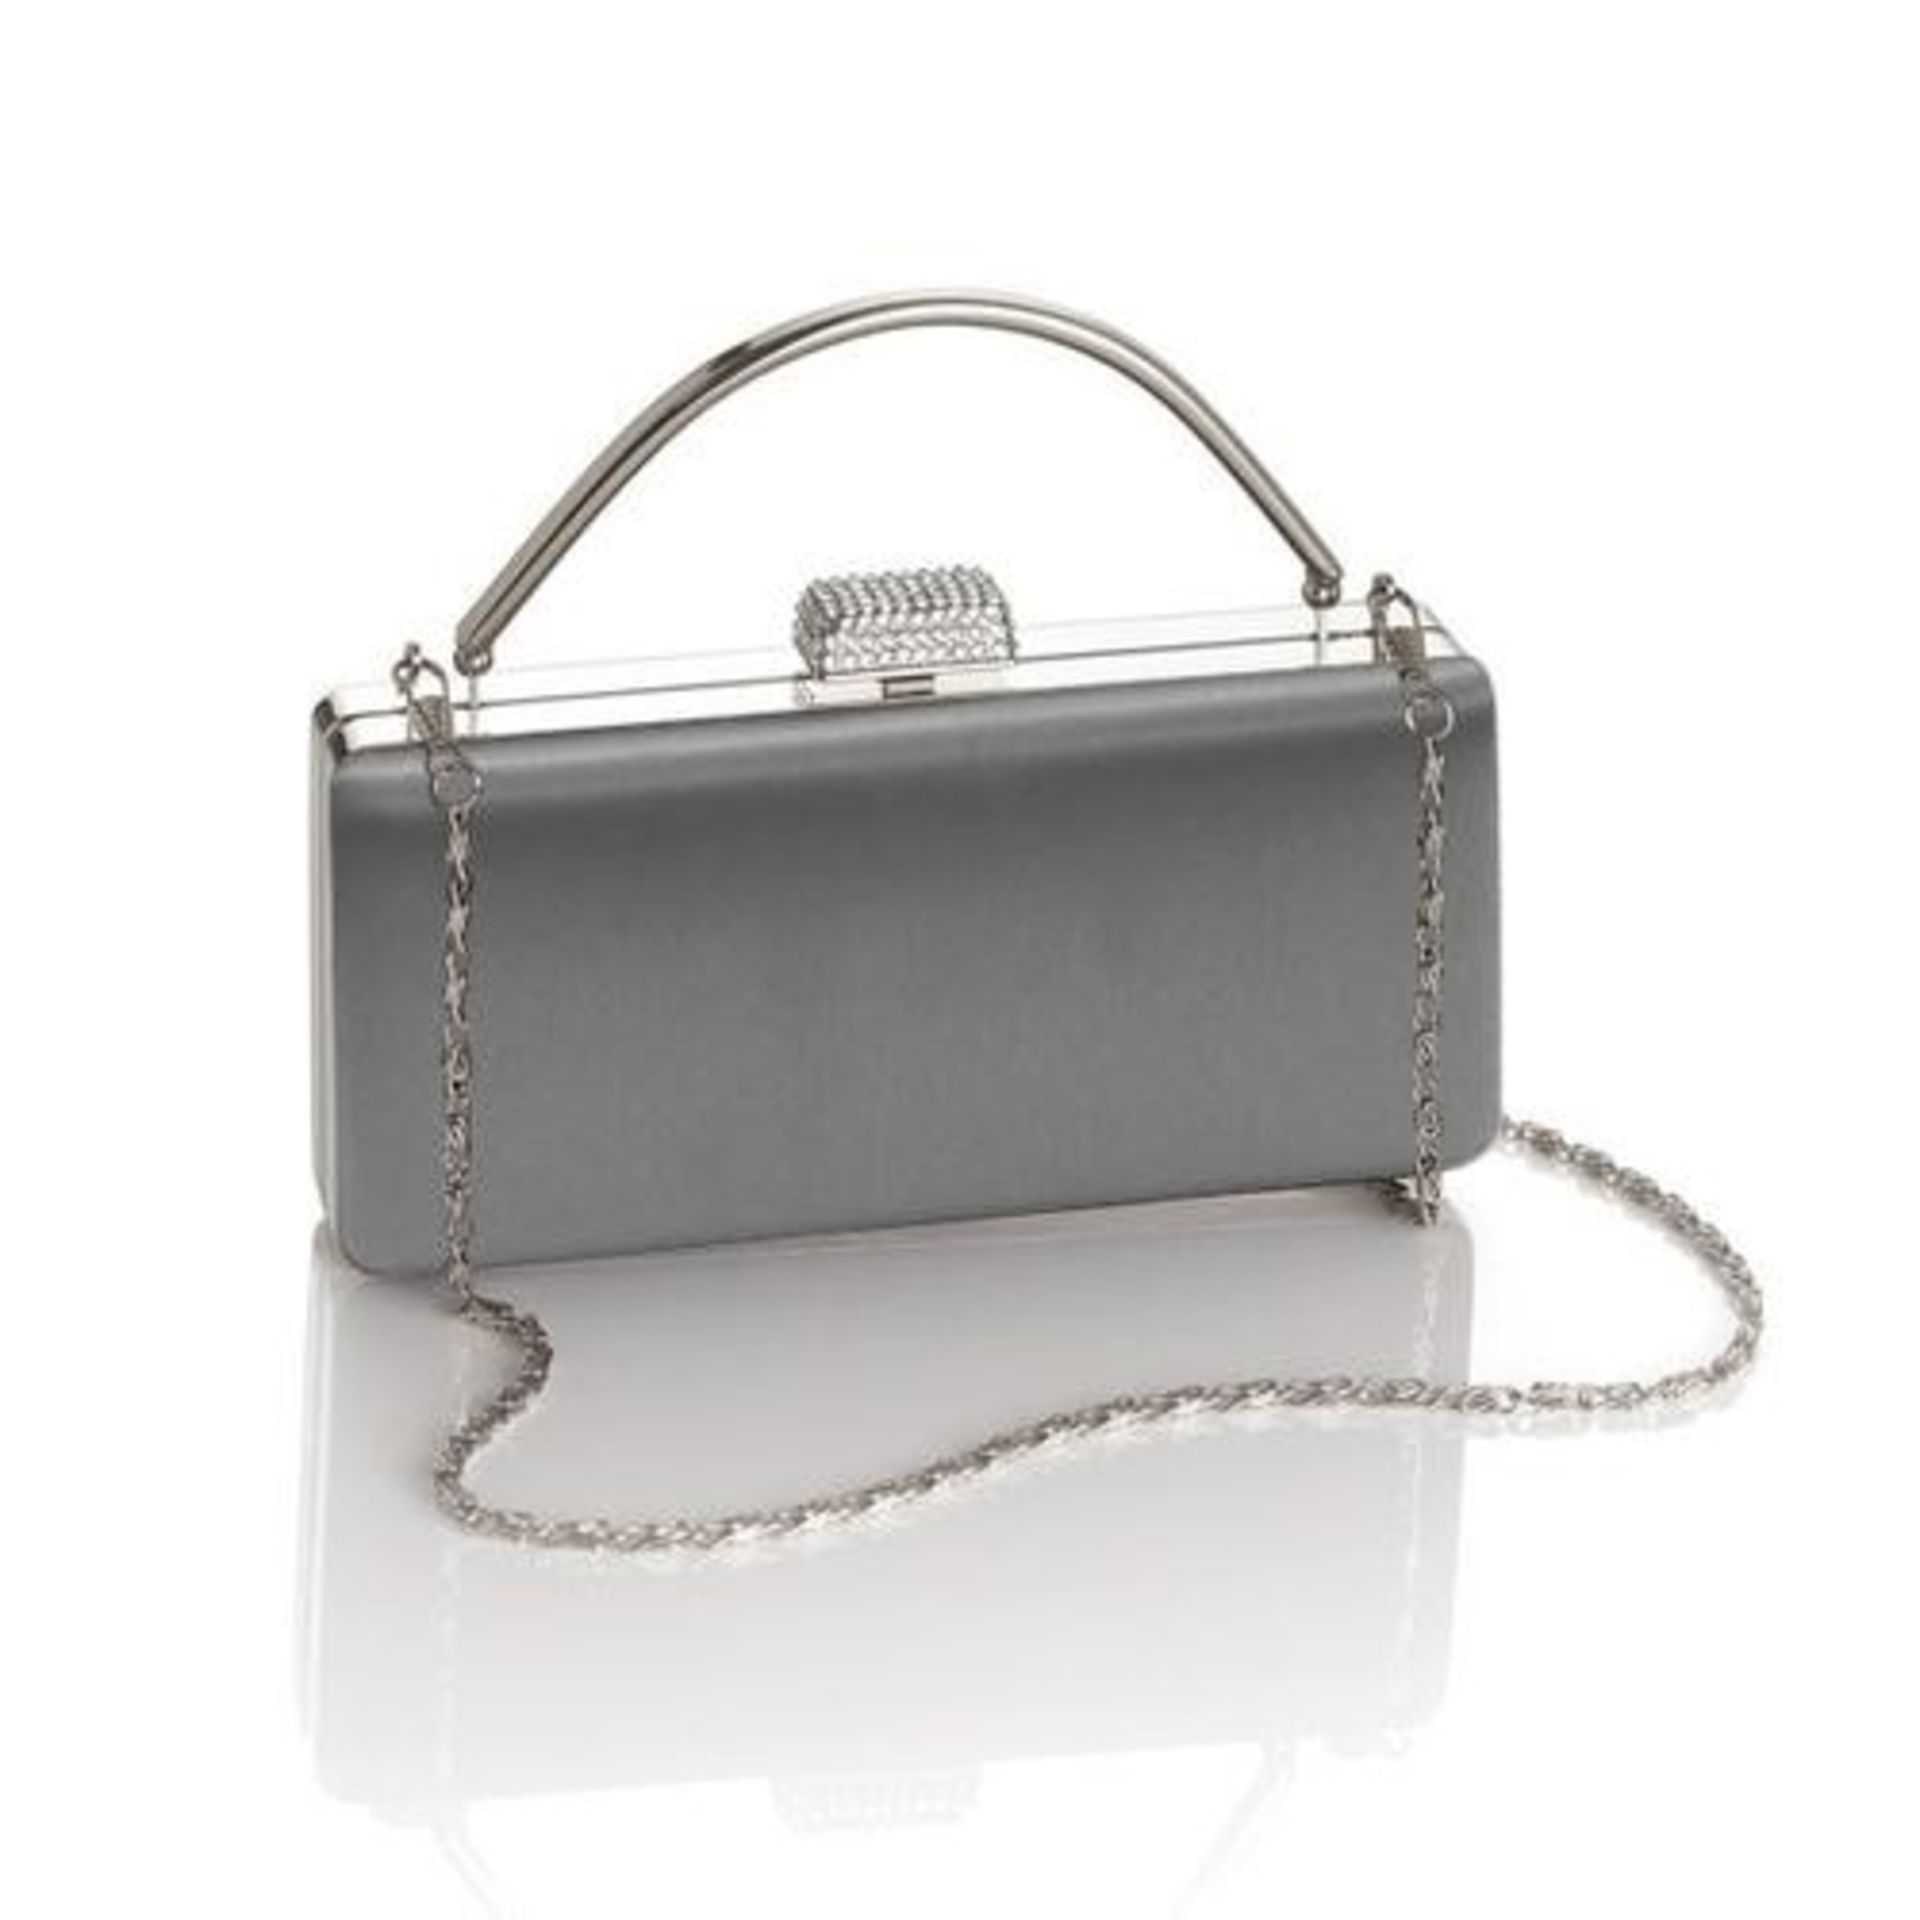 5 x Juliette Evening Bags By ICE London - New & Boxed - Ideal Xmas Gift - Colour: Silver - CL042 -